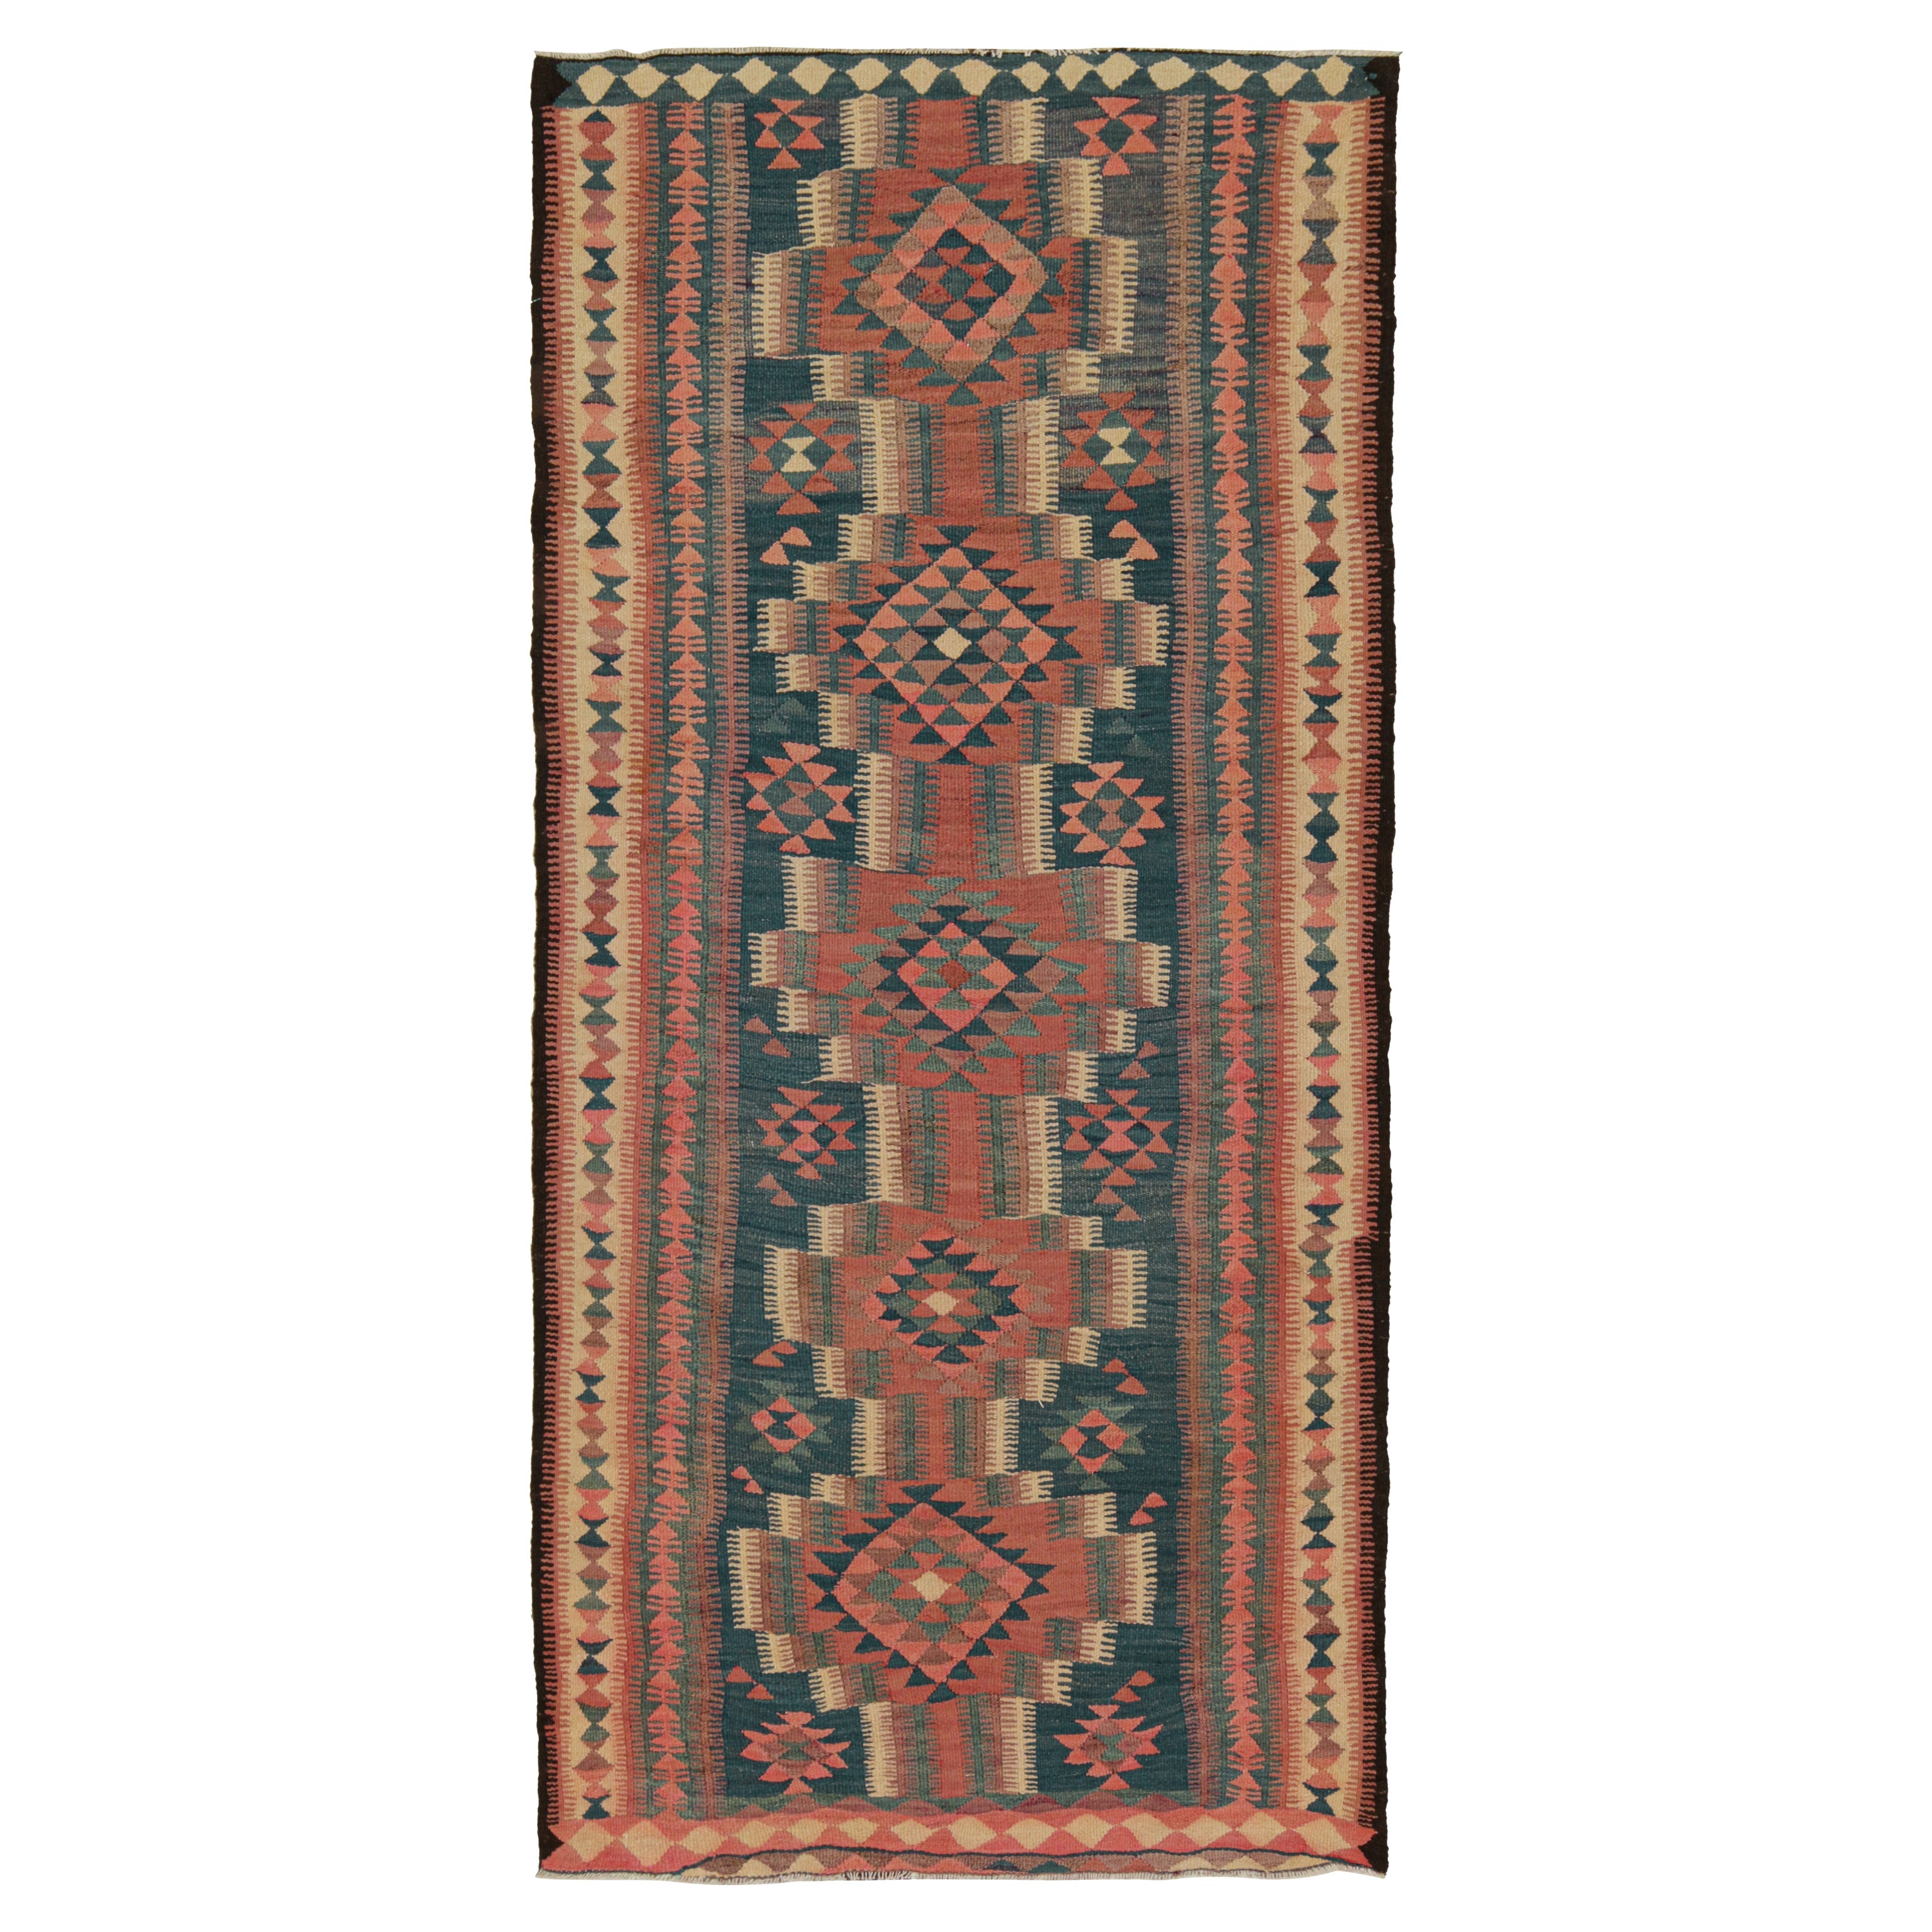 Vintage Kurdish Persian Kilim in Blue and Red Geometric Patterns by Rug & Kilim For Sale